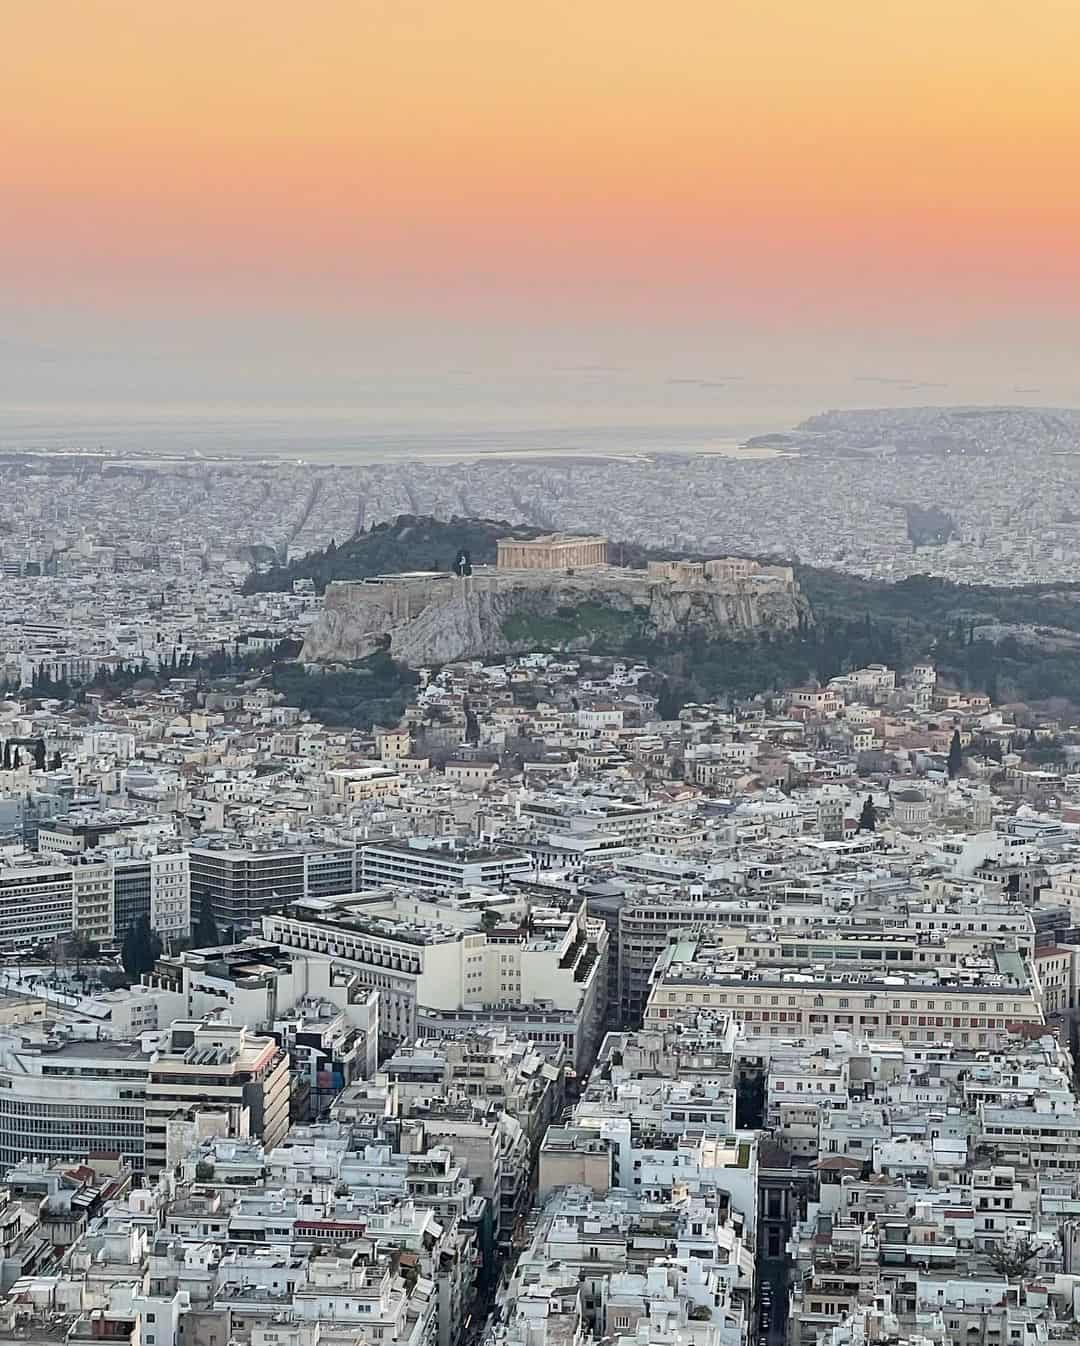 View from Mount Lycabettus